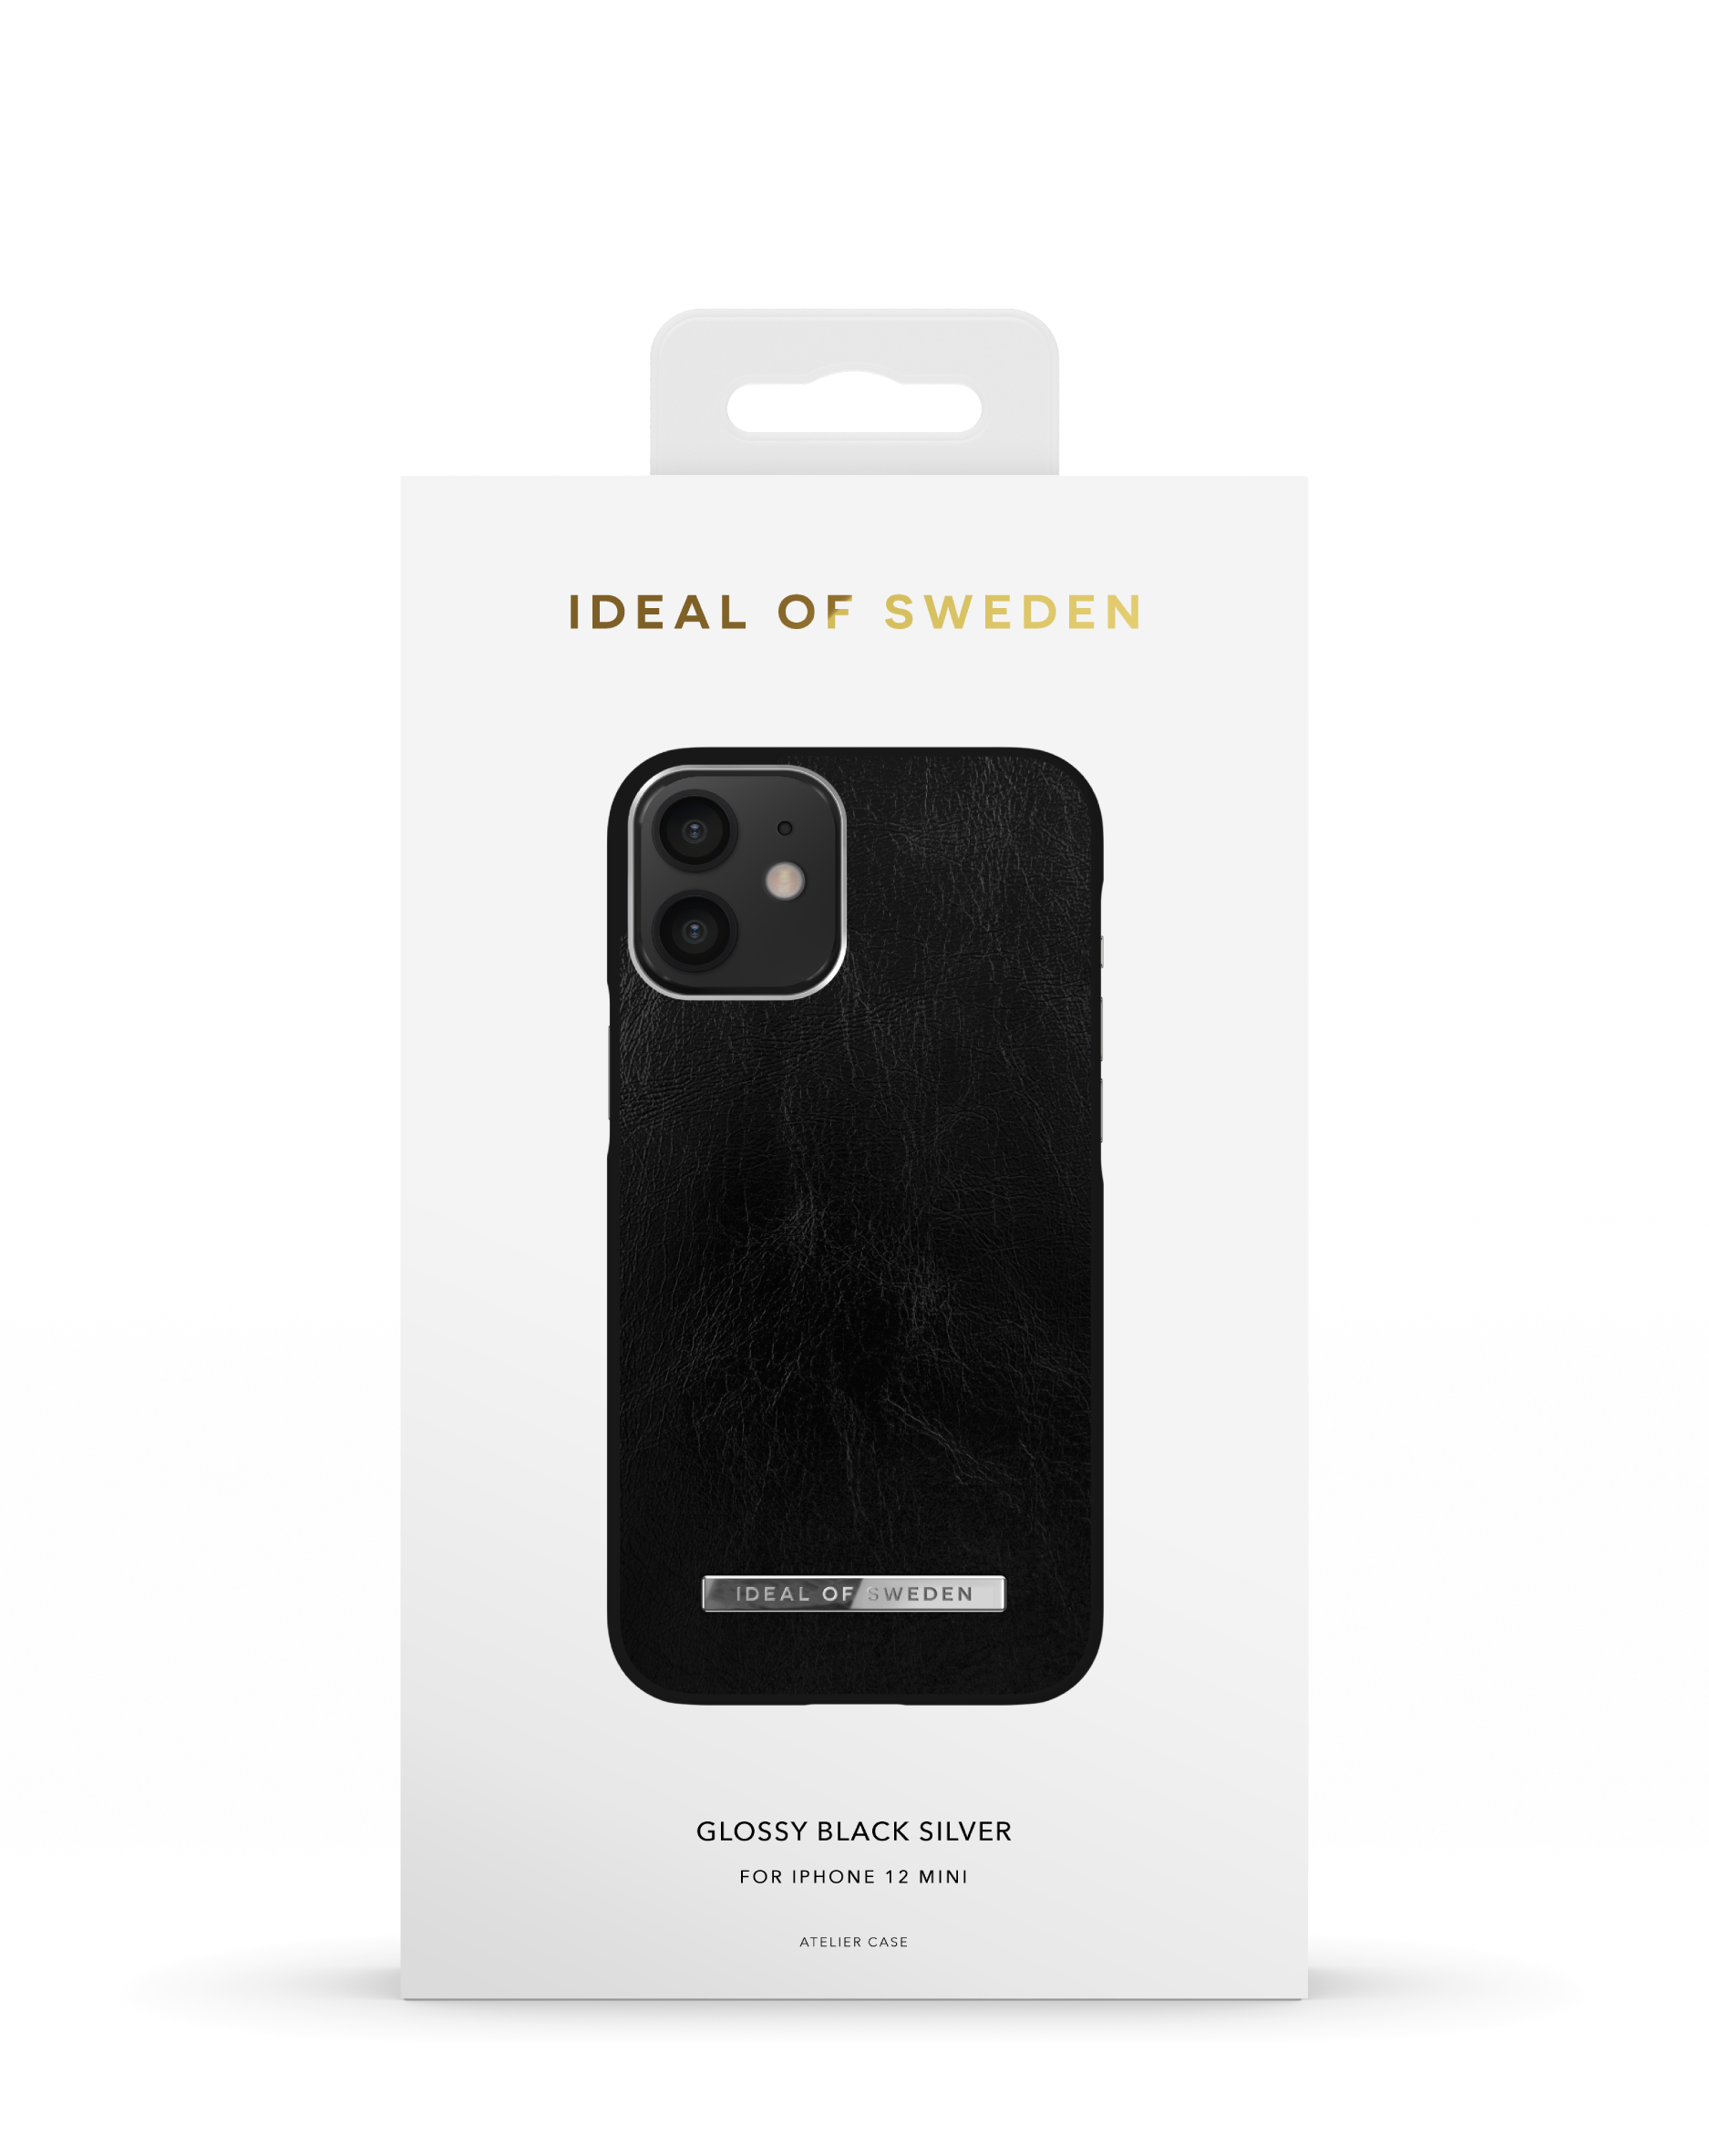 IDEAL OF SWEDEN IDACSS21-I2054-311, 12 Black IPhone Glossy mini, Apple, Silver Backcover